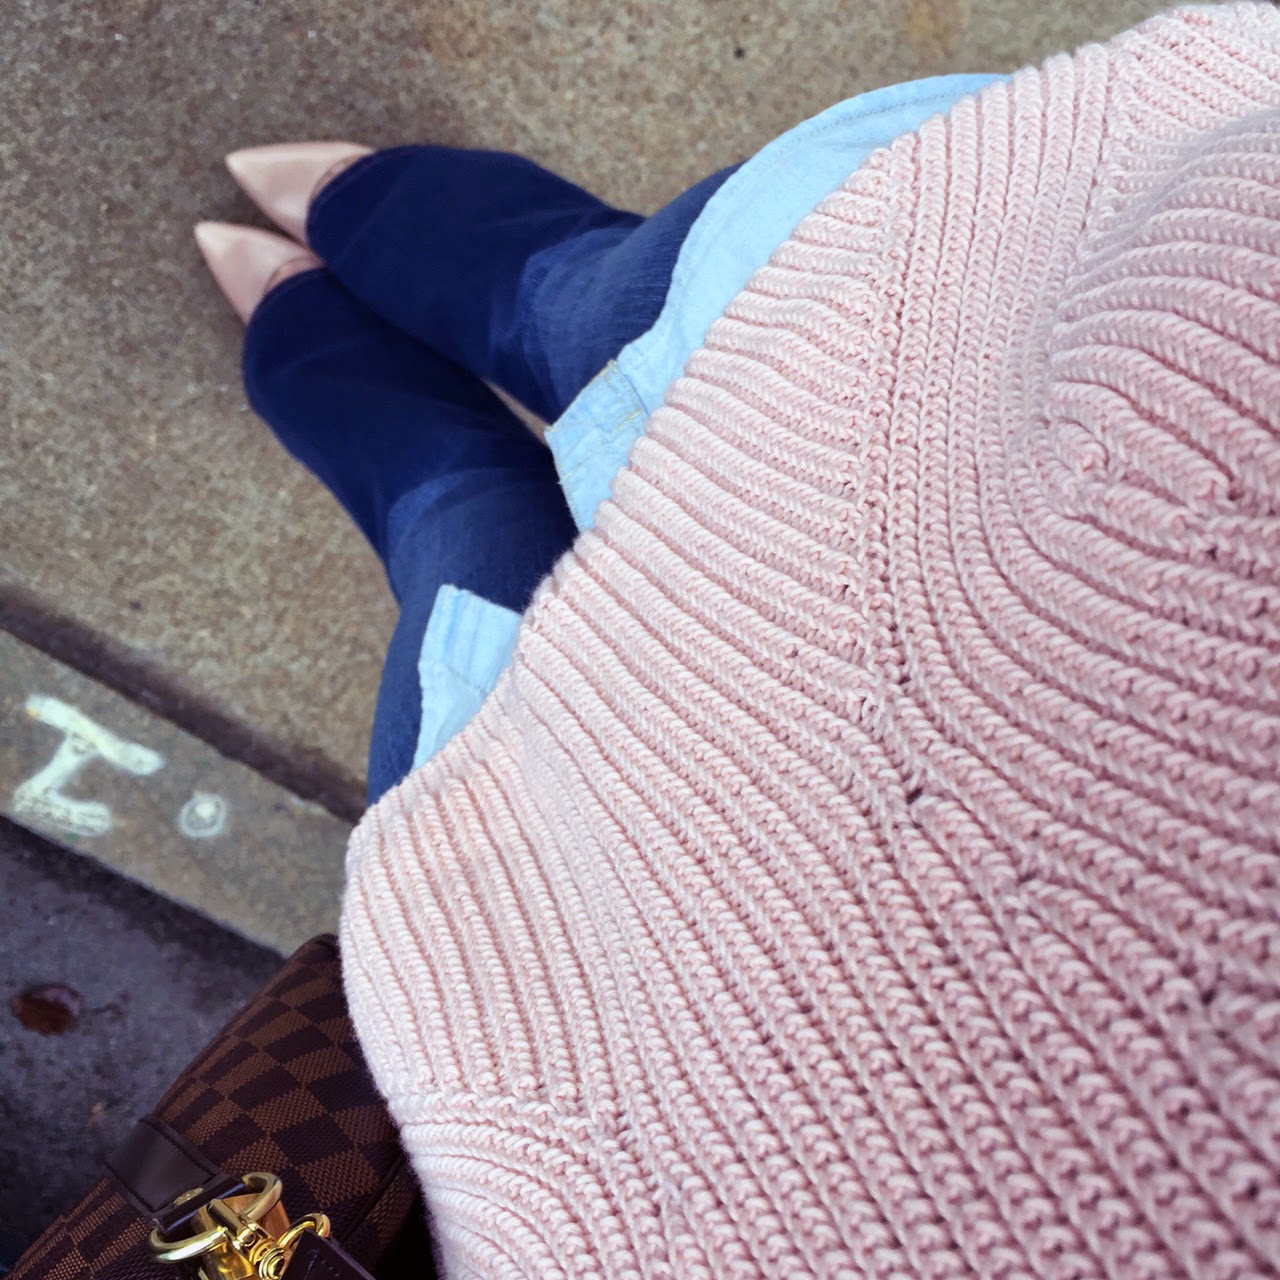 denim on denim, chambray and jeans, madewell chambray and flared jeans, knit sweater layered on chambray, blue and pink layers, boston style blogger, boston style, fashion blogger style